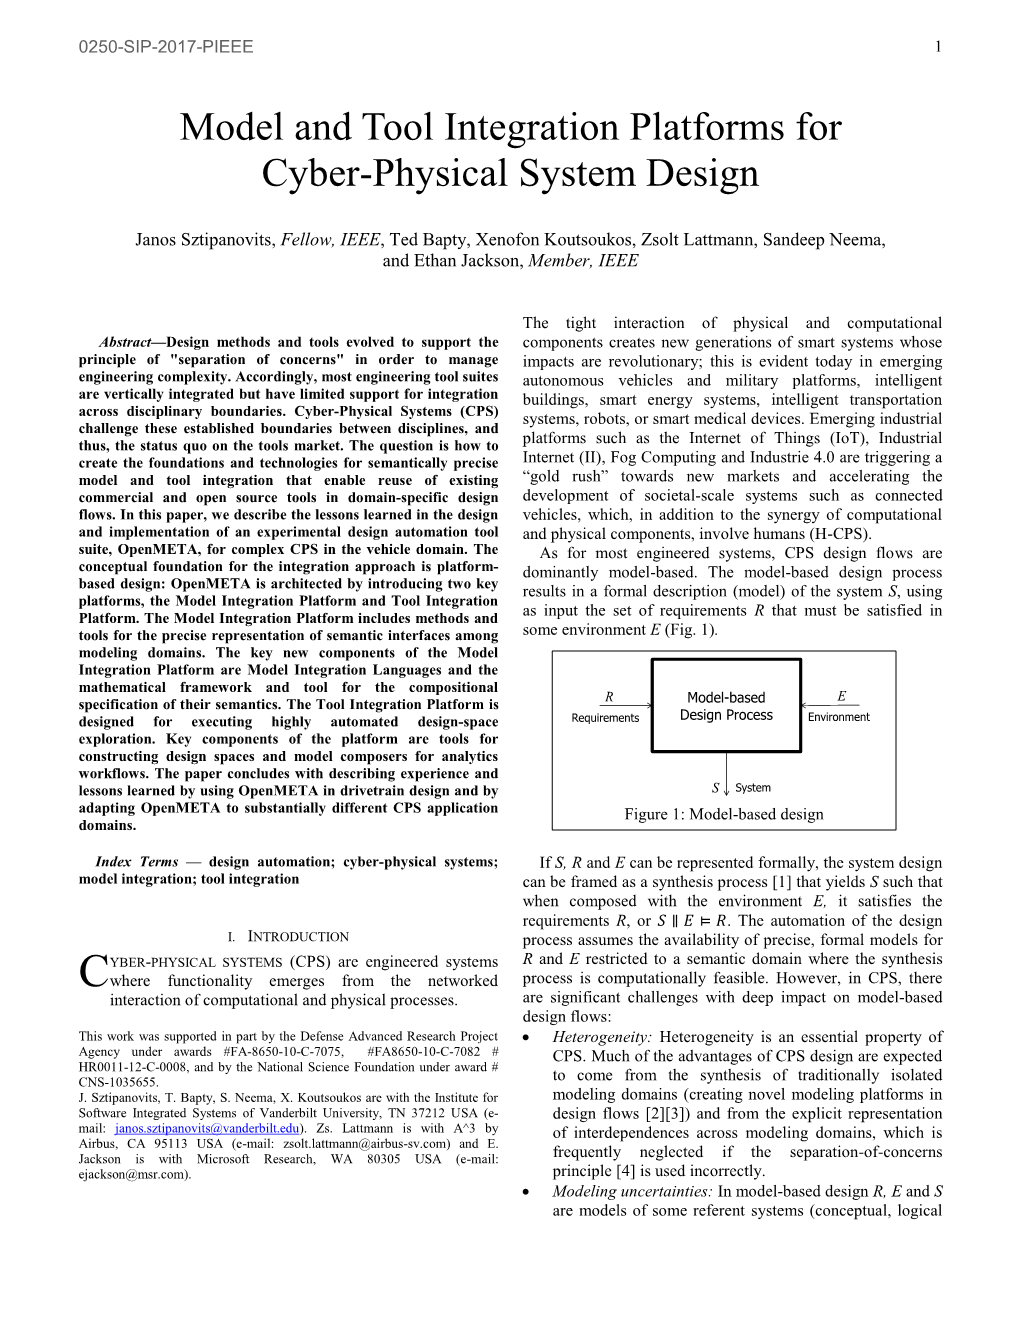 Model and Tool Integration Platforms for Cyber-Physical System Design